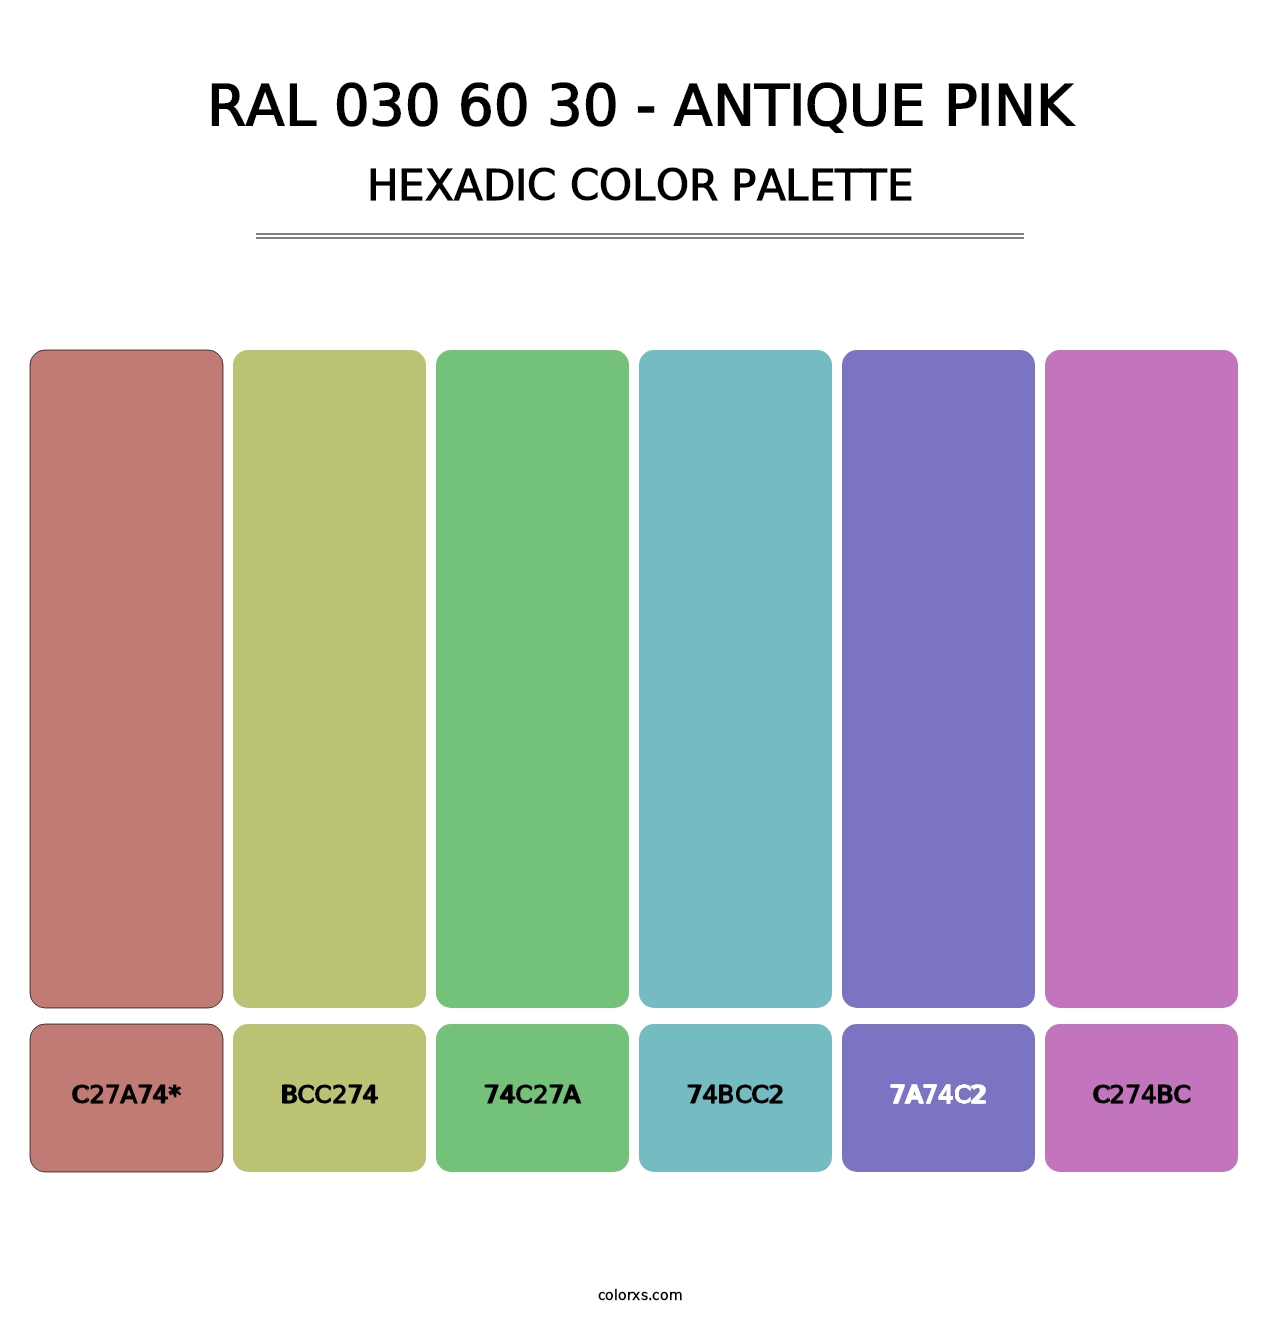 RAL 030 60 30 - Antique Pink - Hexadic Color Palette